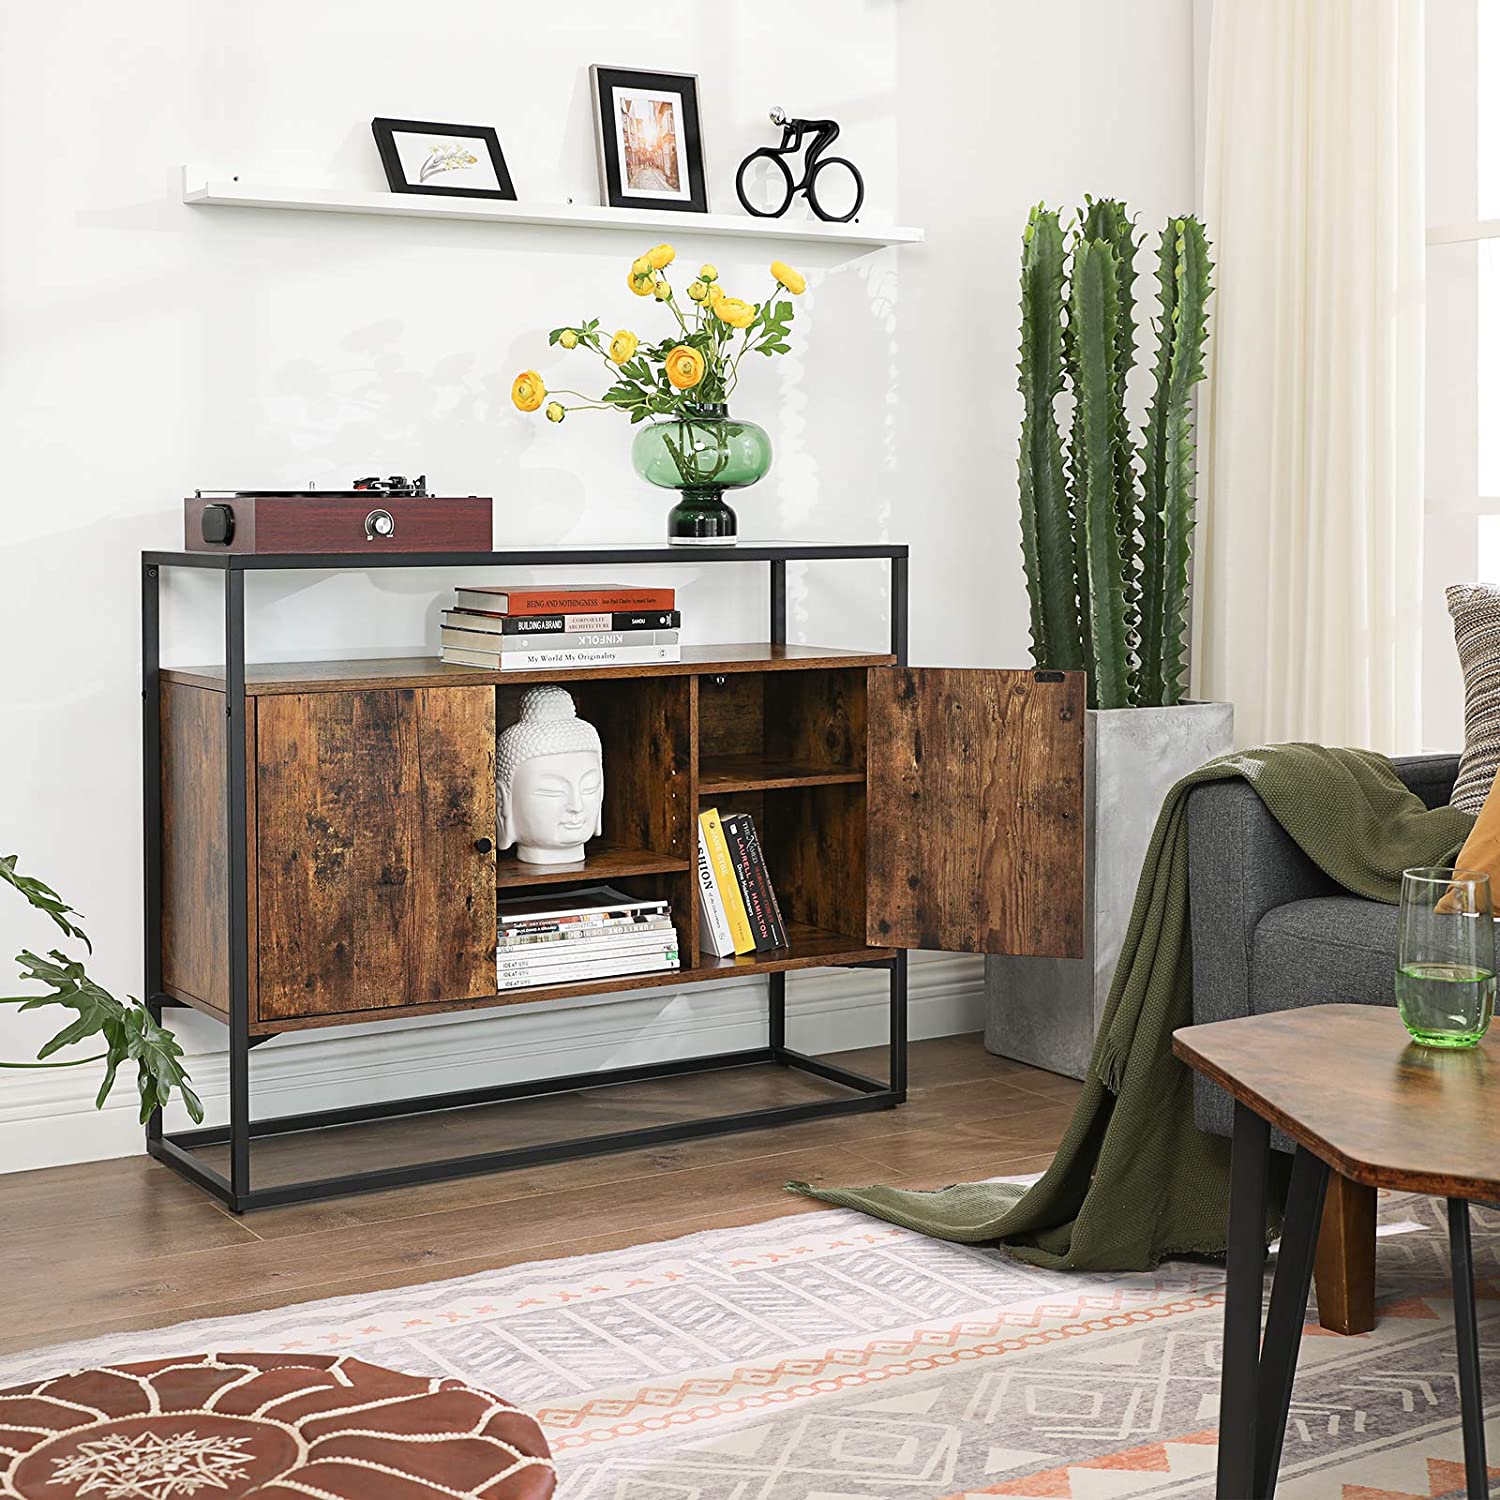 Sideboard, Side Cabinet, Storage Cabinet with Glass Surface and Open Compartments, Living Room, Hallway, Stable Steel Frame, Tempered Glass, Industrial, Rustic Brown and Black LSC014B01 RAW58.dk 